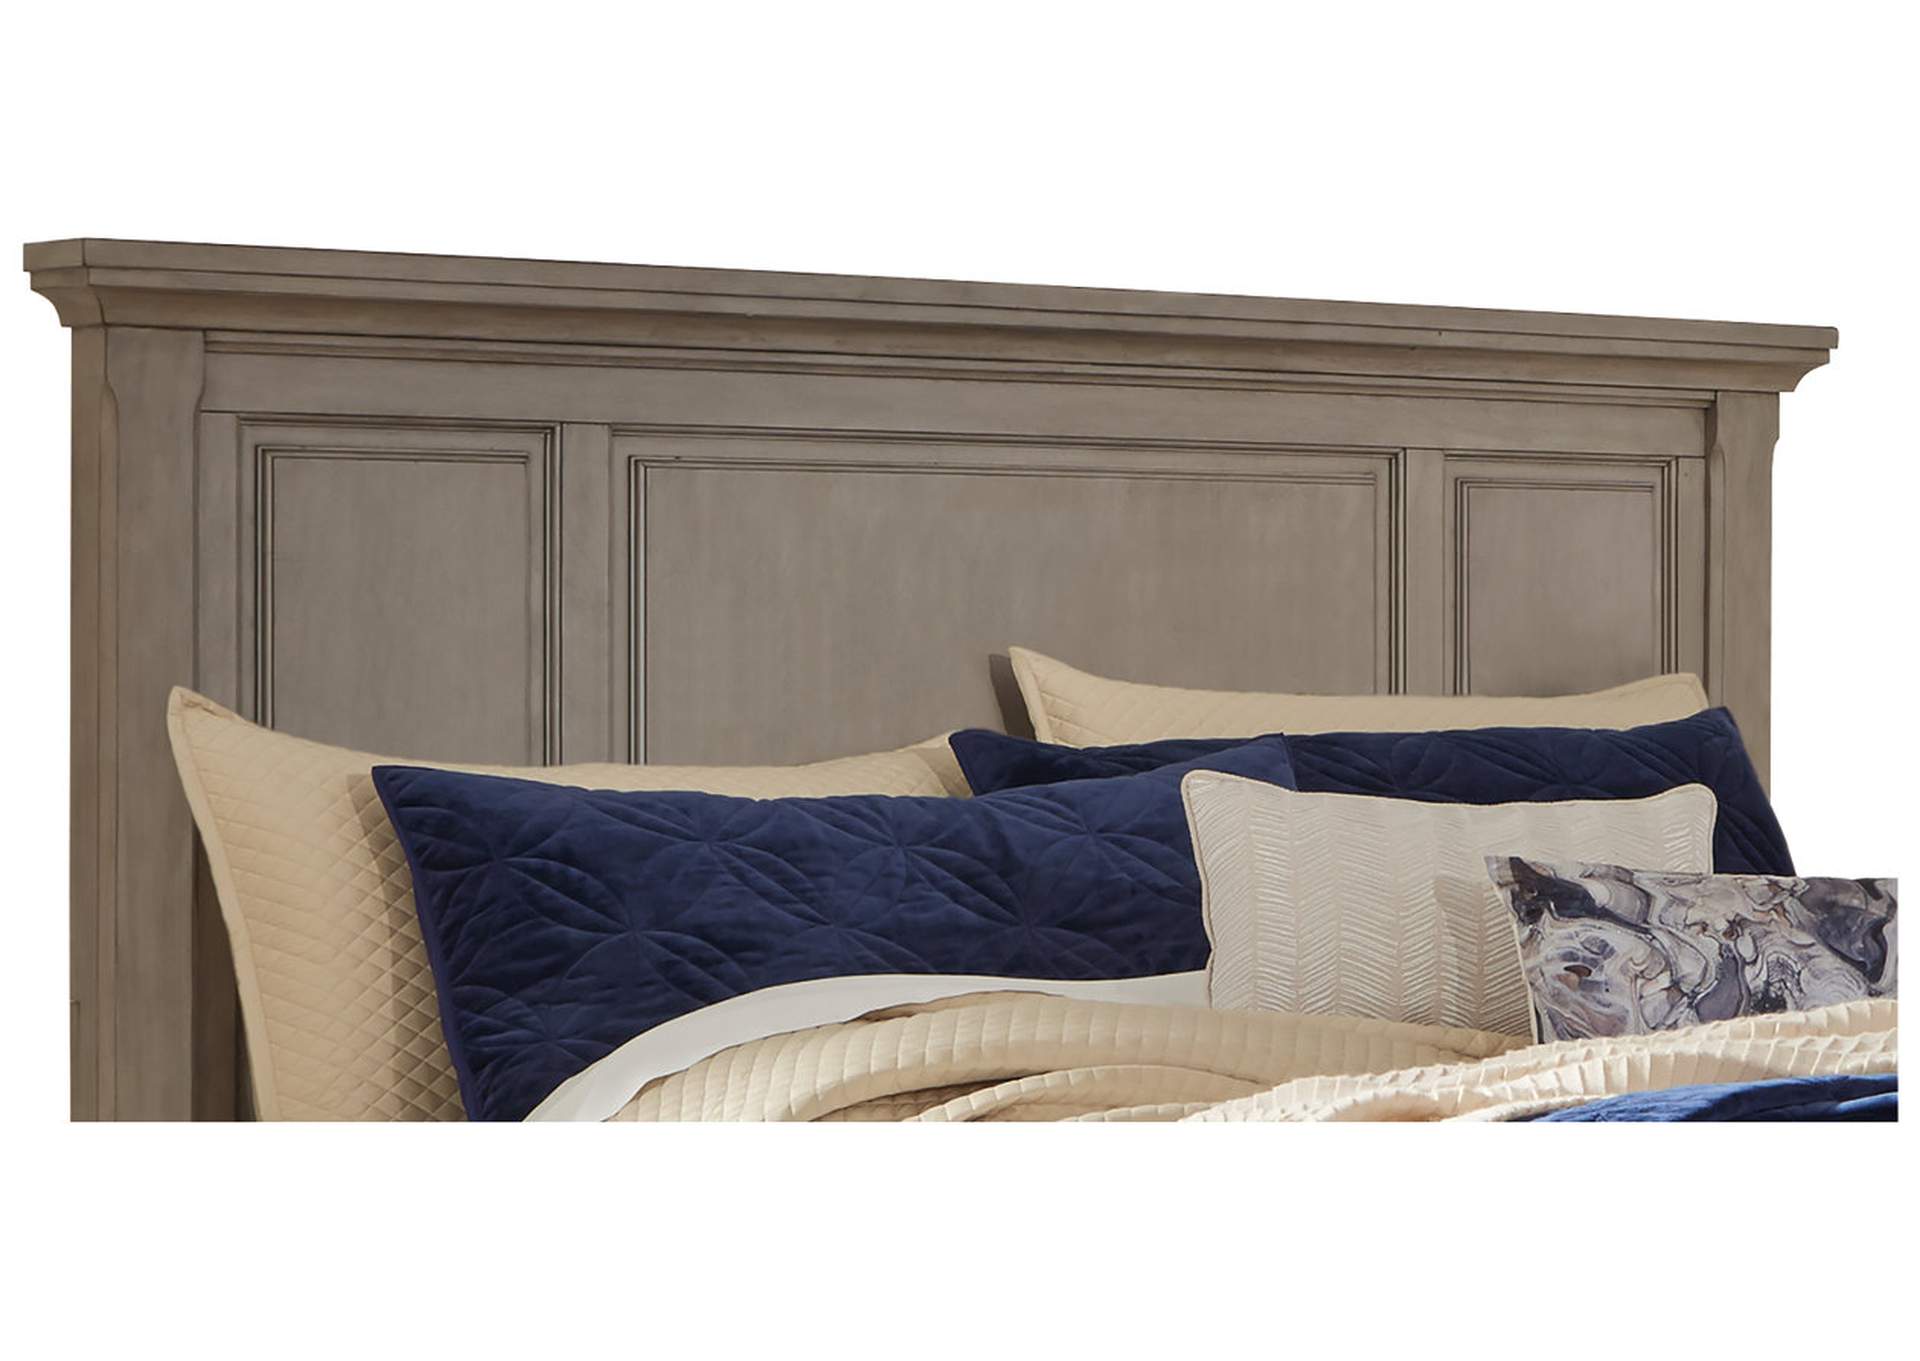 Lettner California King Panel Bed, Dresser, Chest and 2 Nightstands,Signature Design By Ashley